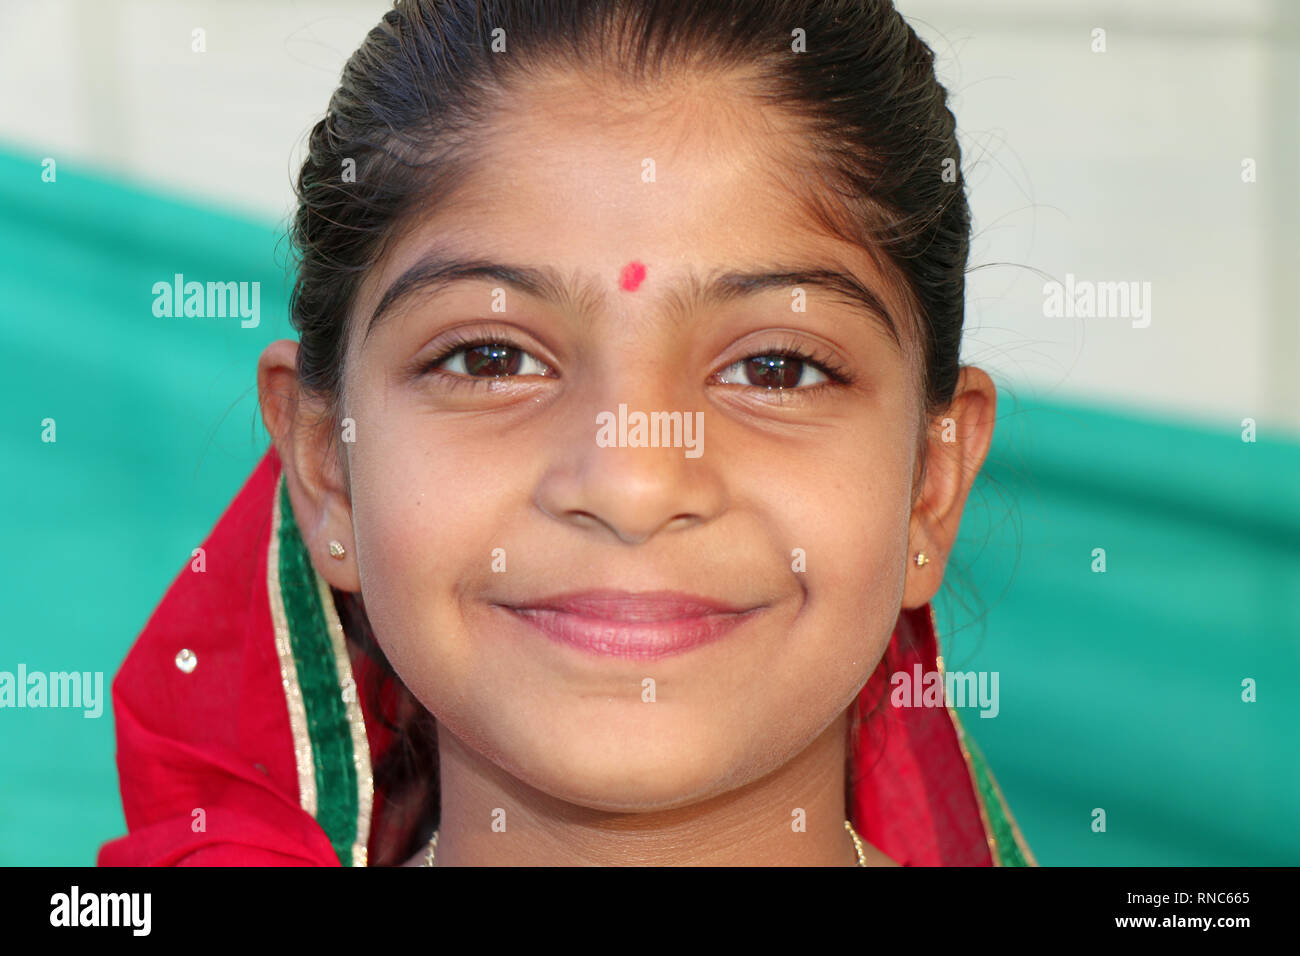 https://c8.alamy.com/comp/RNC665/indian-cute-girl-with-smiling-face-this-girl-is-looking-very-beautiful-she-is-wearing-red-cloth-and-a-red-spot-on-her-head-RNC665.jpg